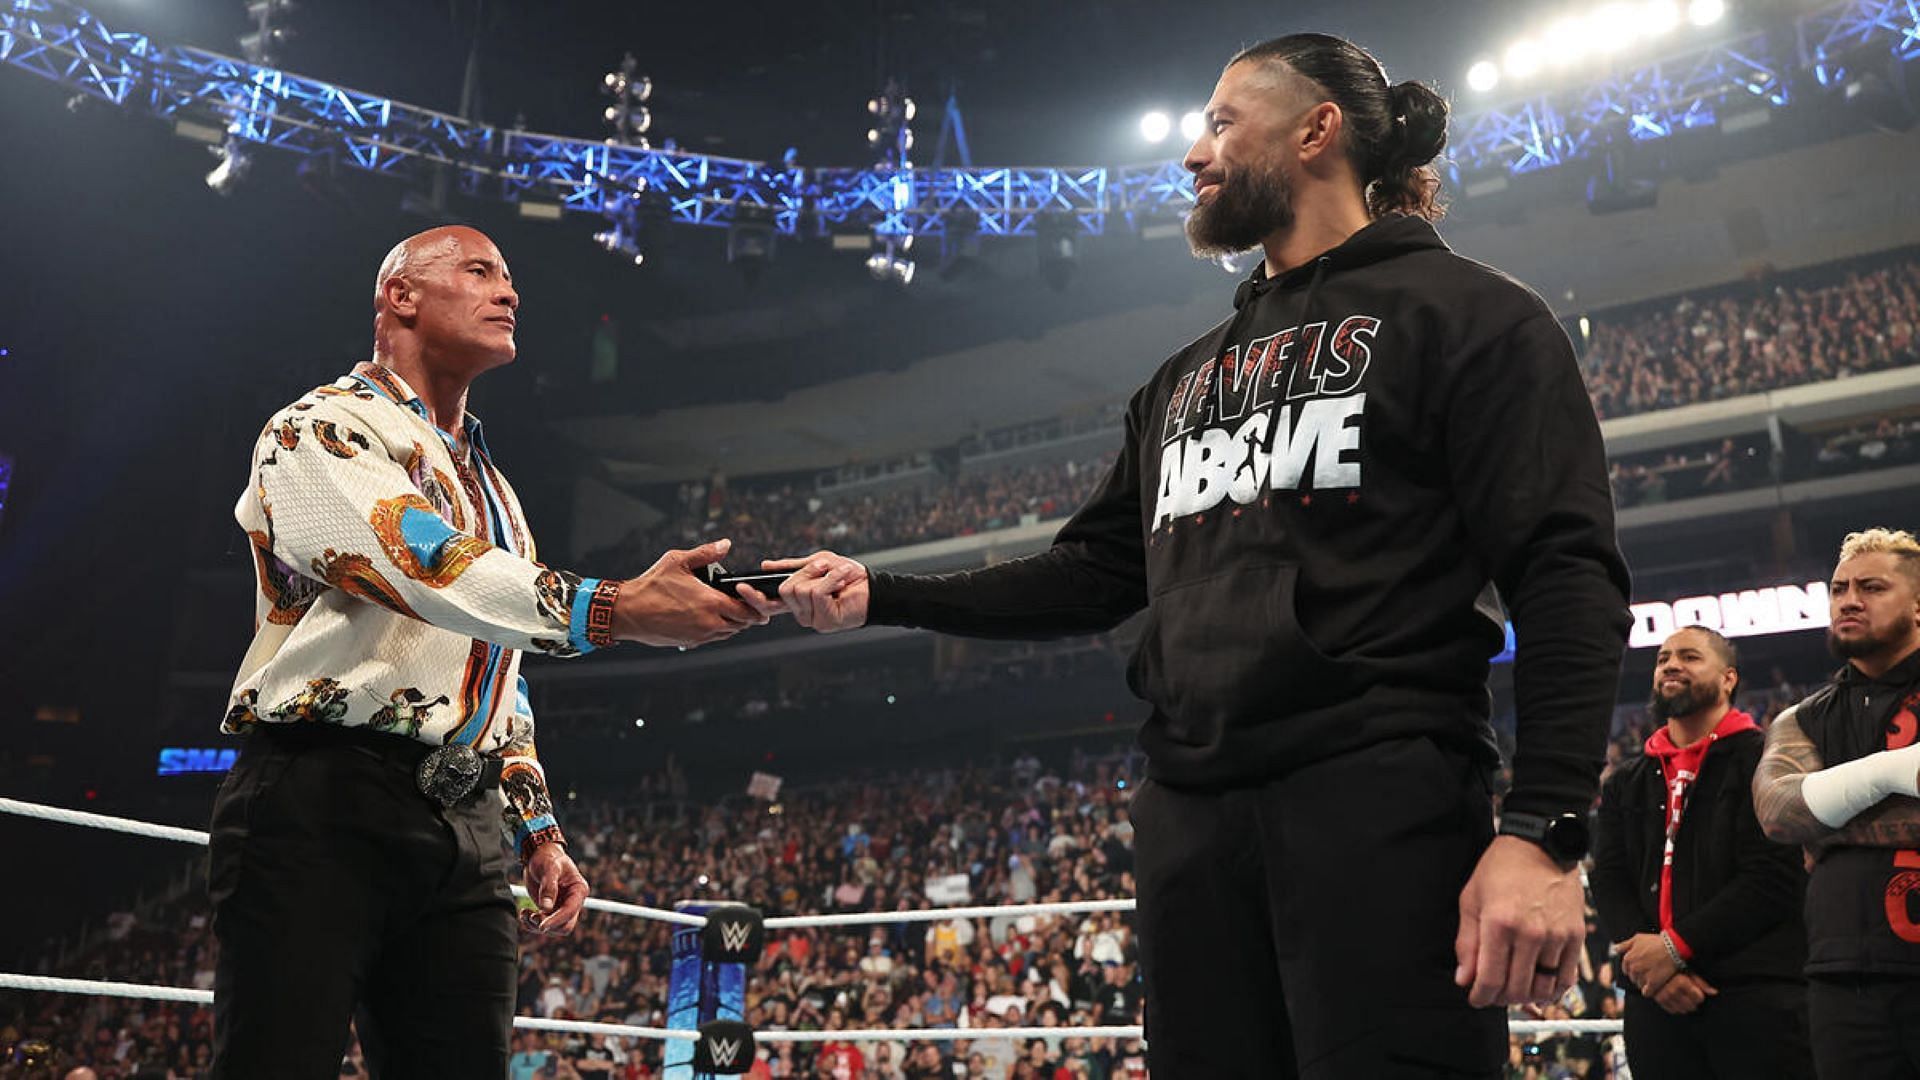 The Rock acknowledged Roman Reigns on the latest episode of SmackDown.